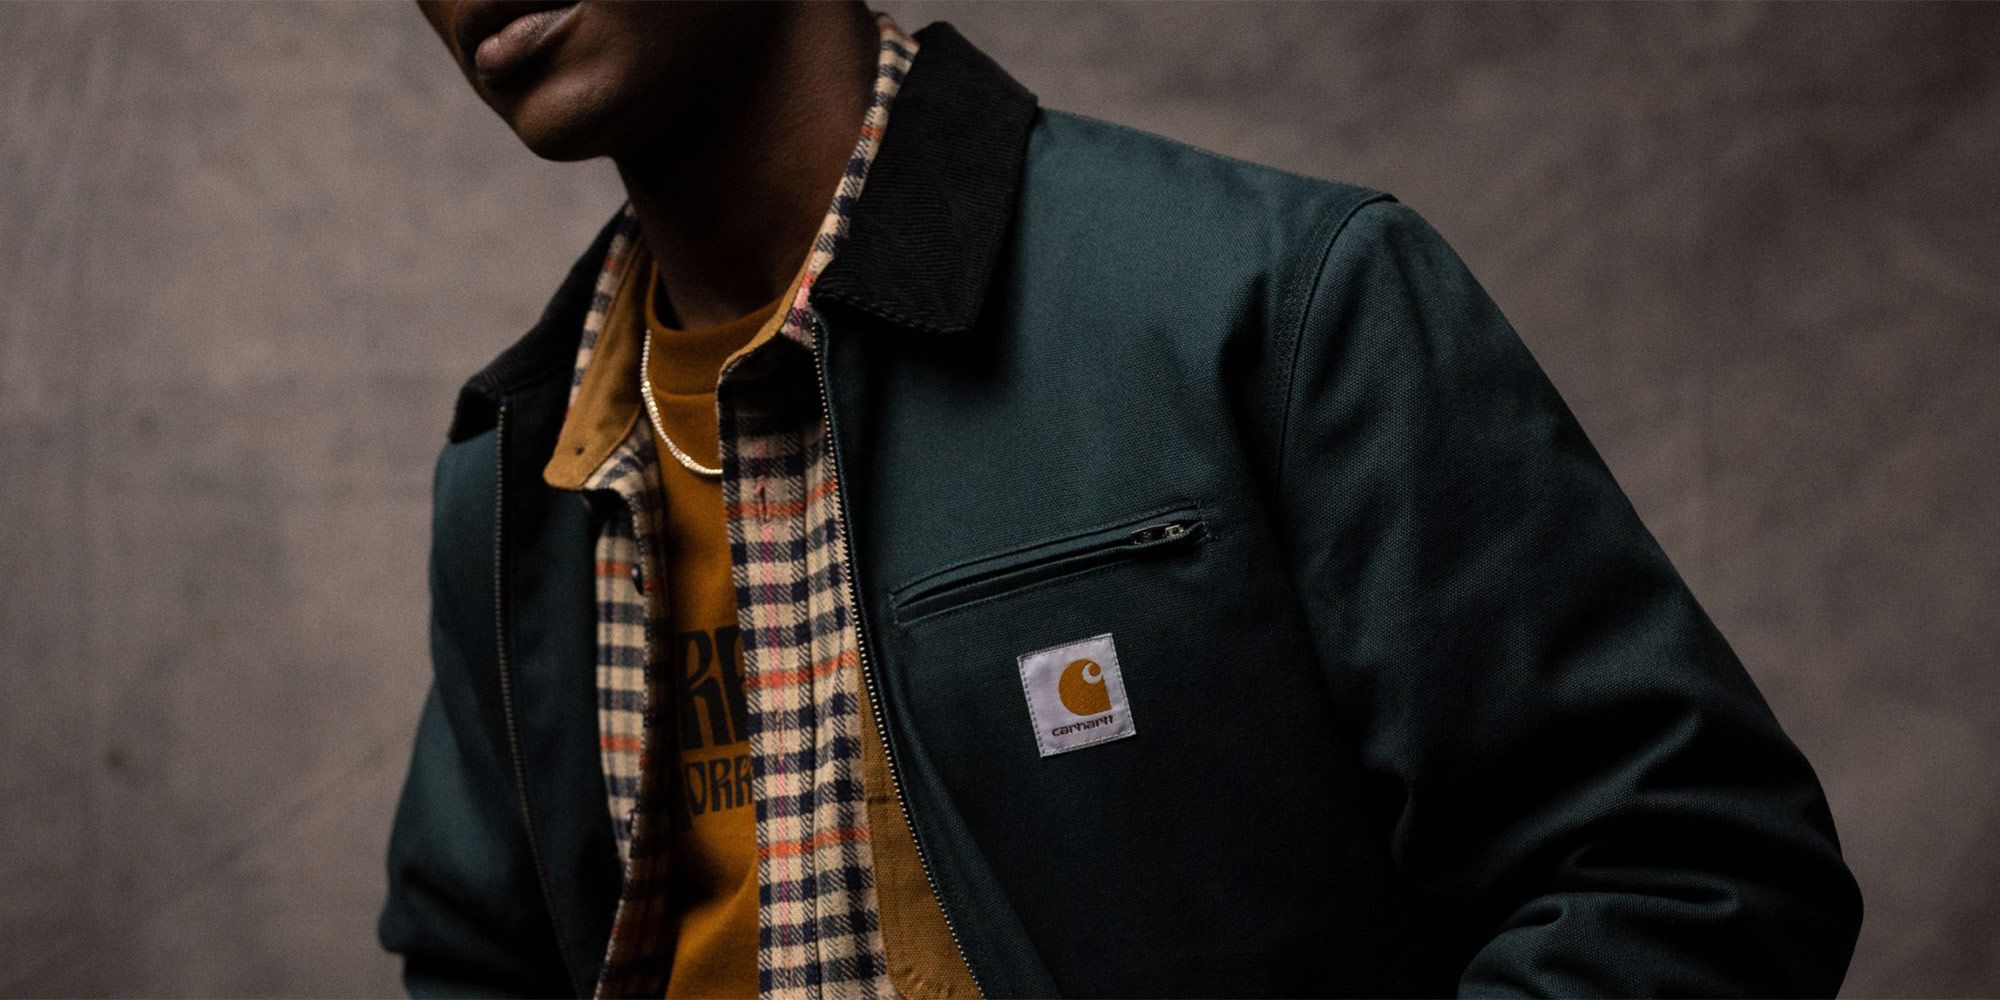 Carhartt Detroit Jacket: Durable and Reliable Workwear